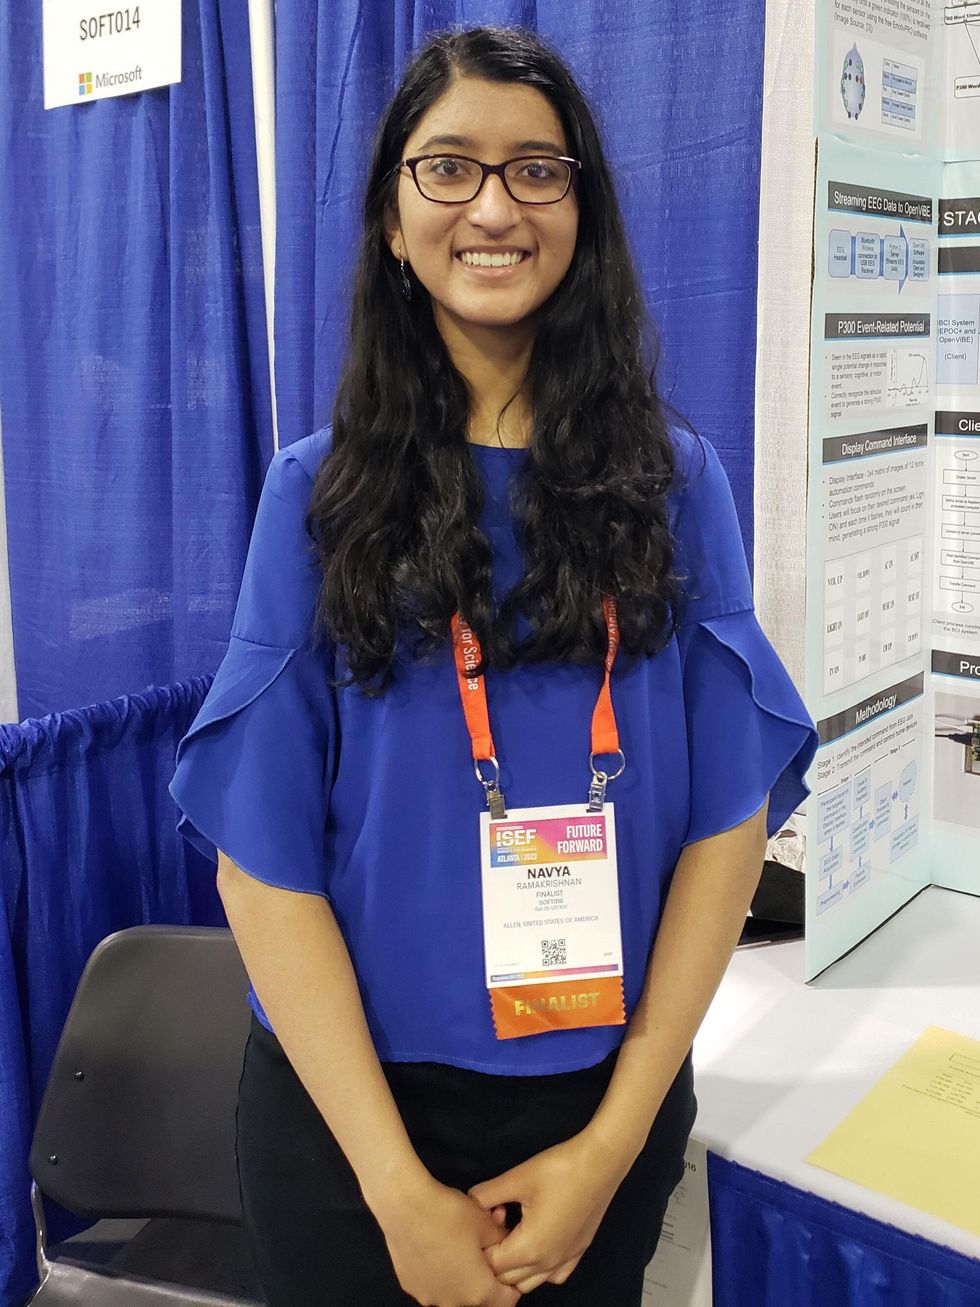 A female student wearing a lanyard identifying her as a finalist at ISEF.